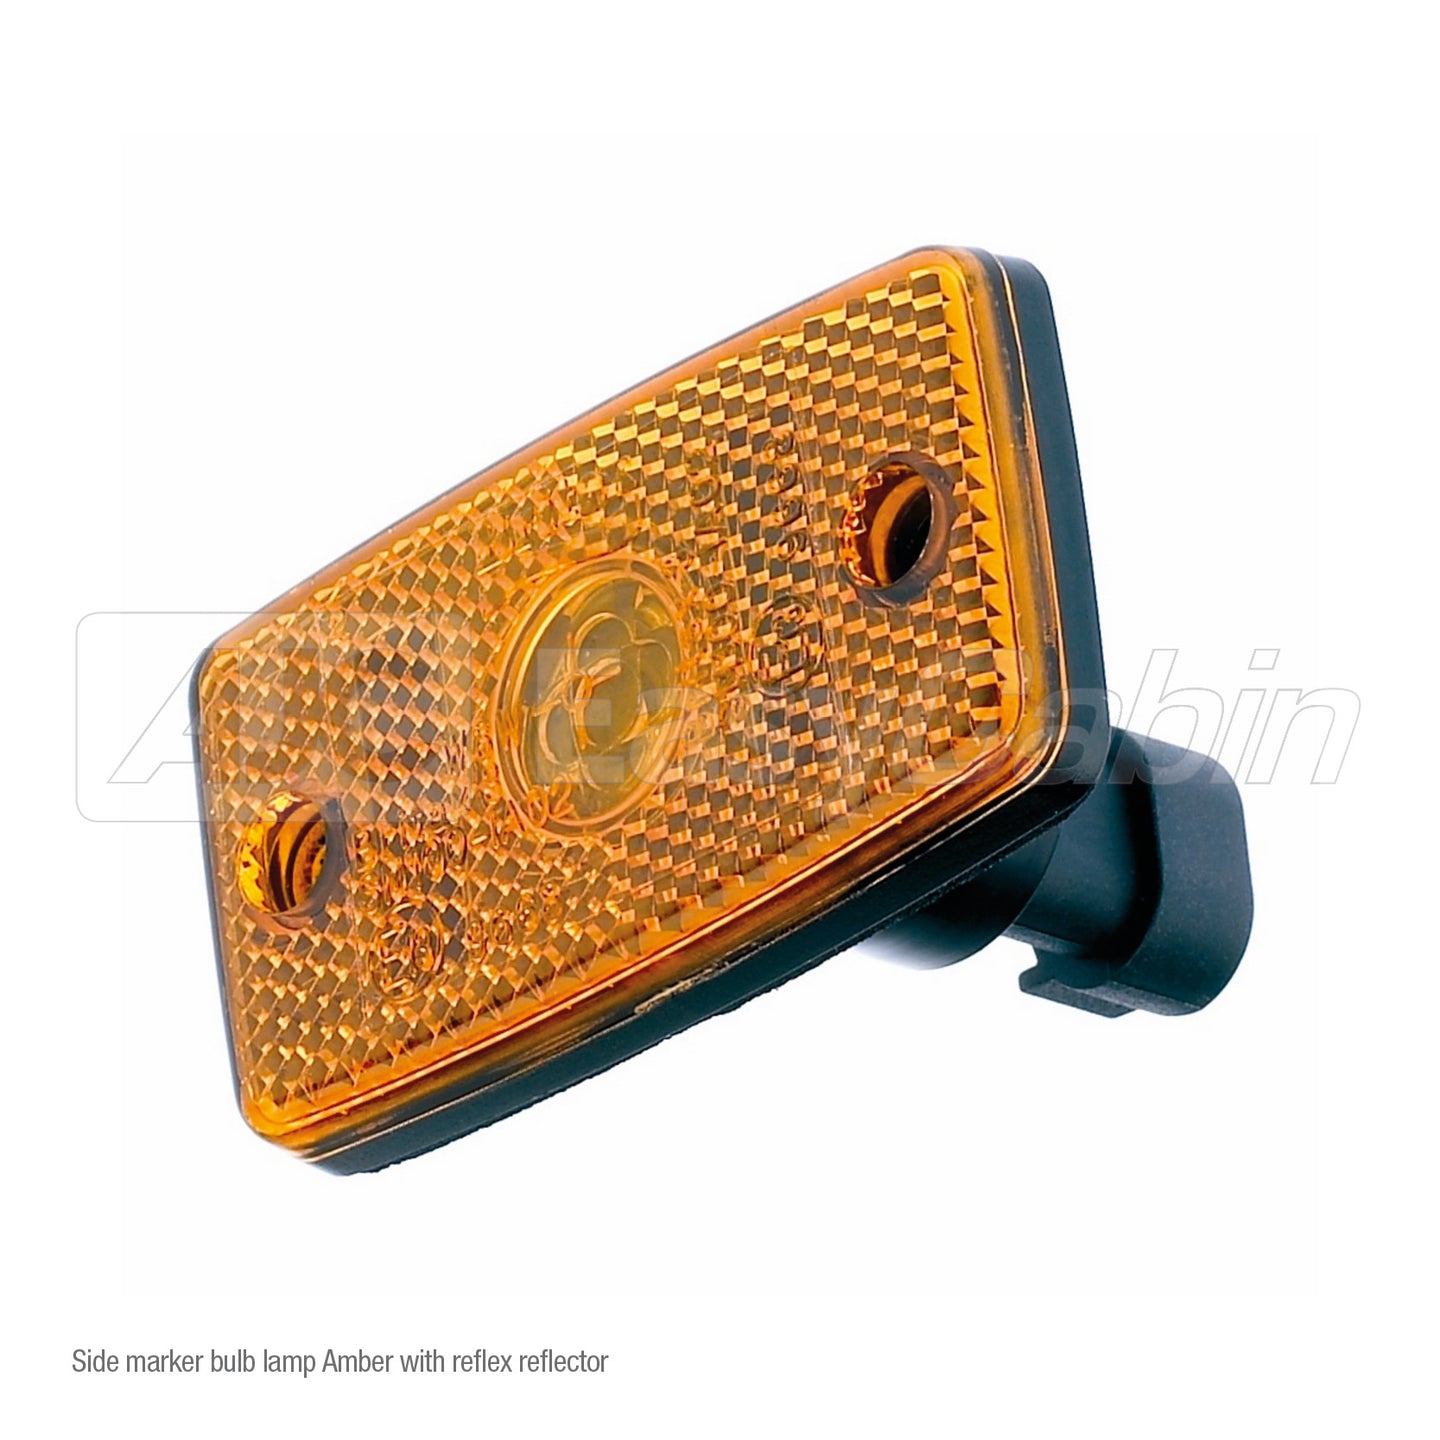 Side Marker Bulb Lamp Amber With Reflex Reflector